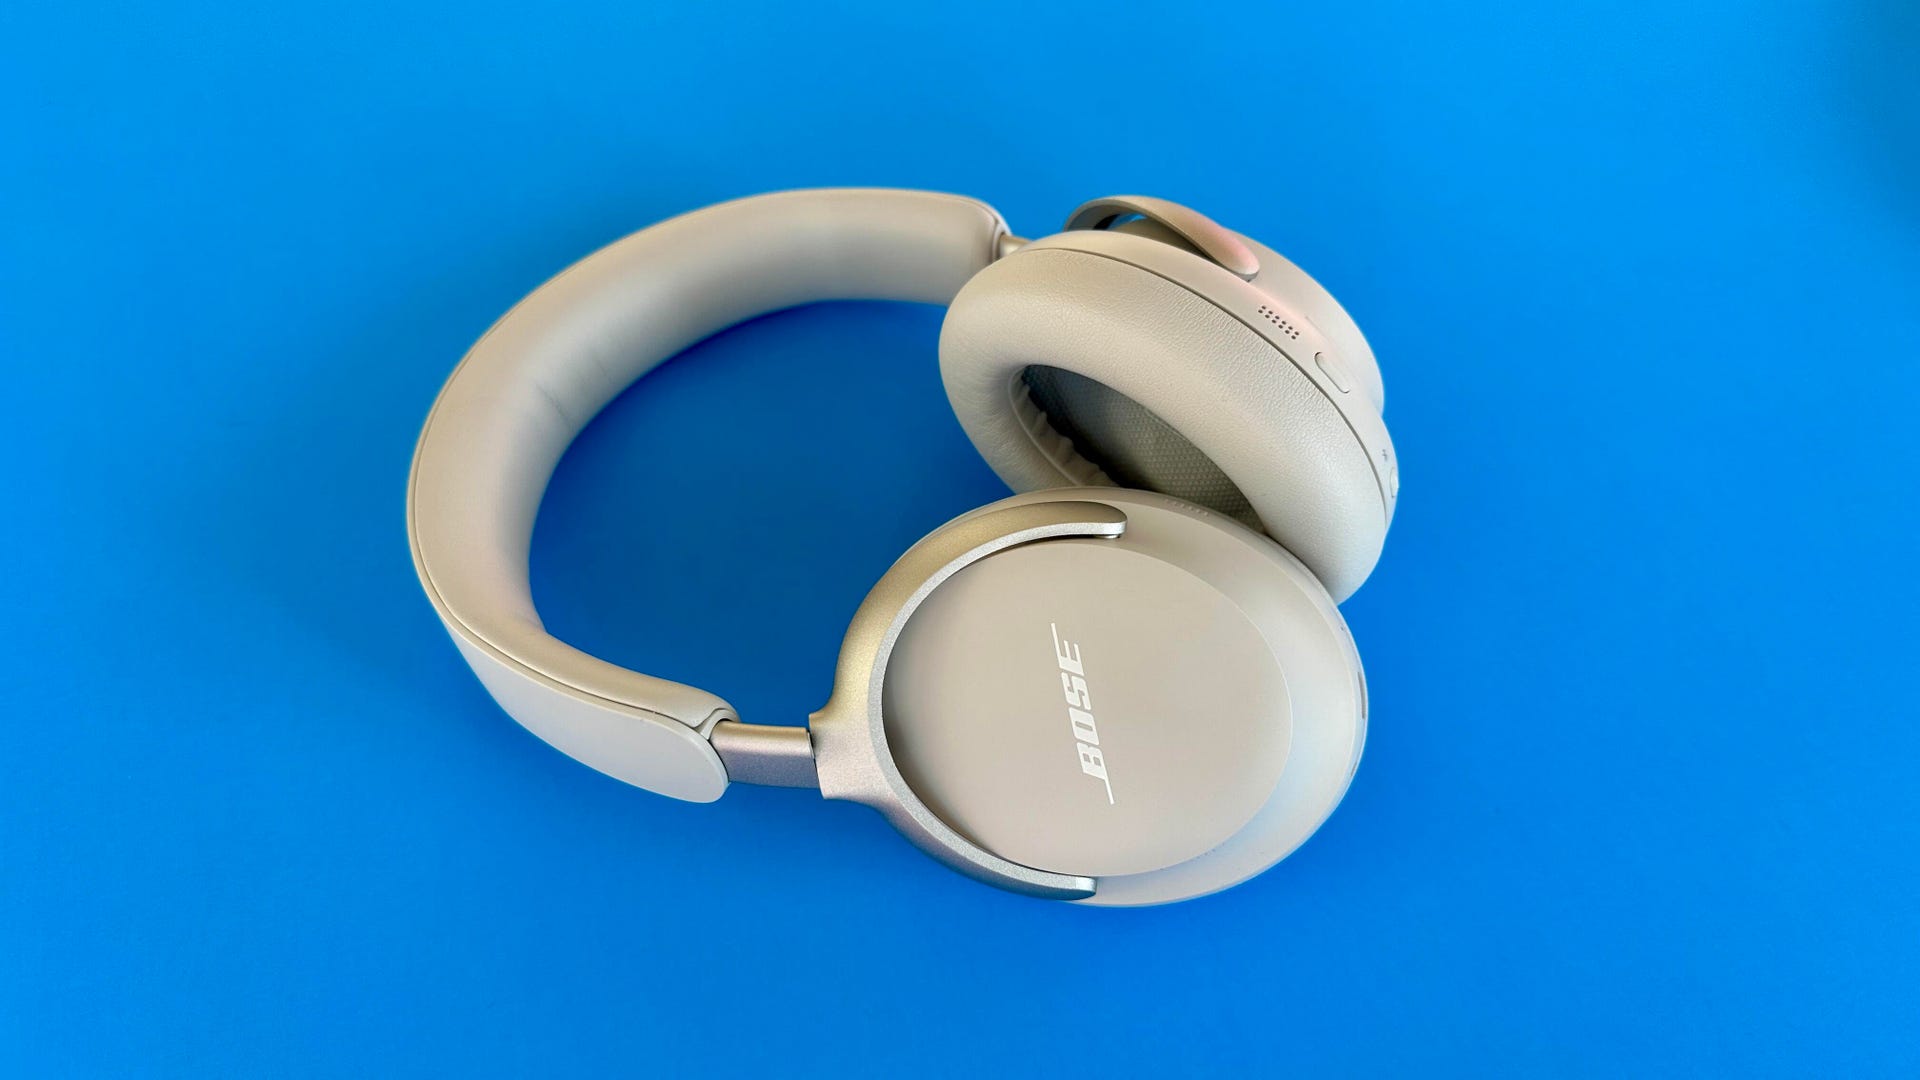 The Bose QuietComfort Ultra Headphones have a mix of physical buttons and touch controls